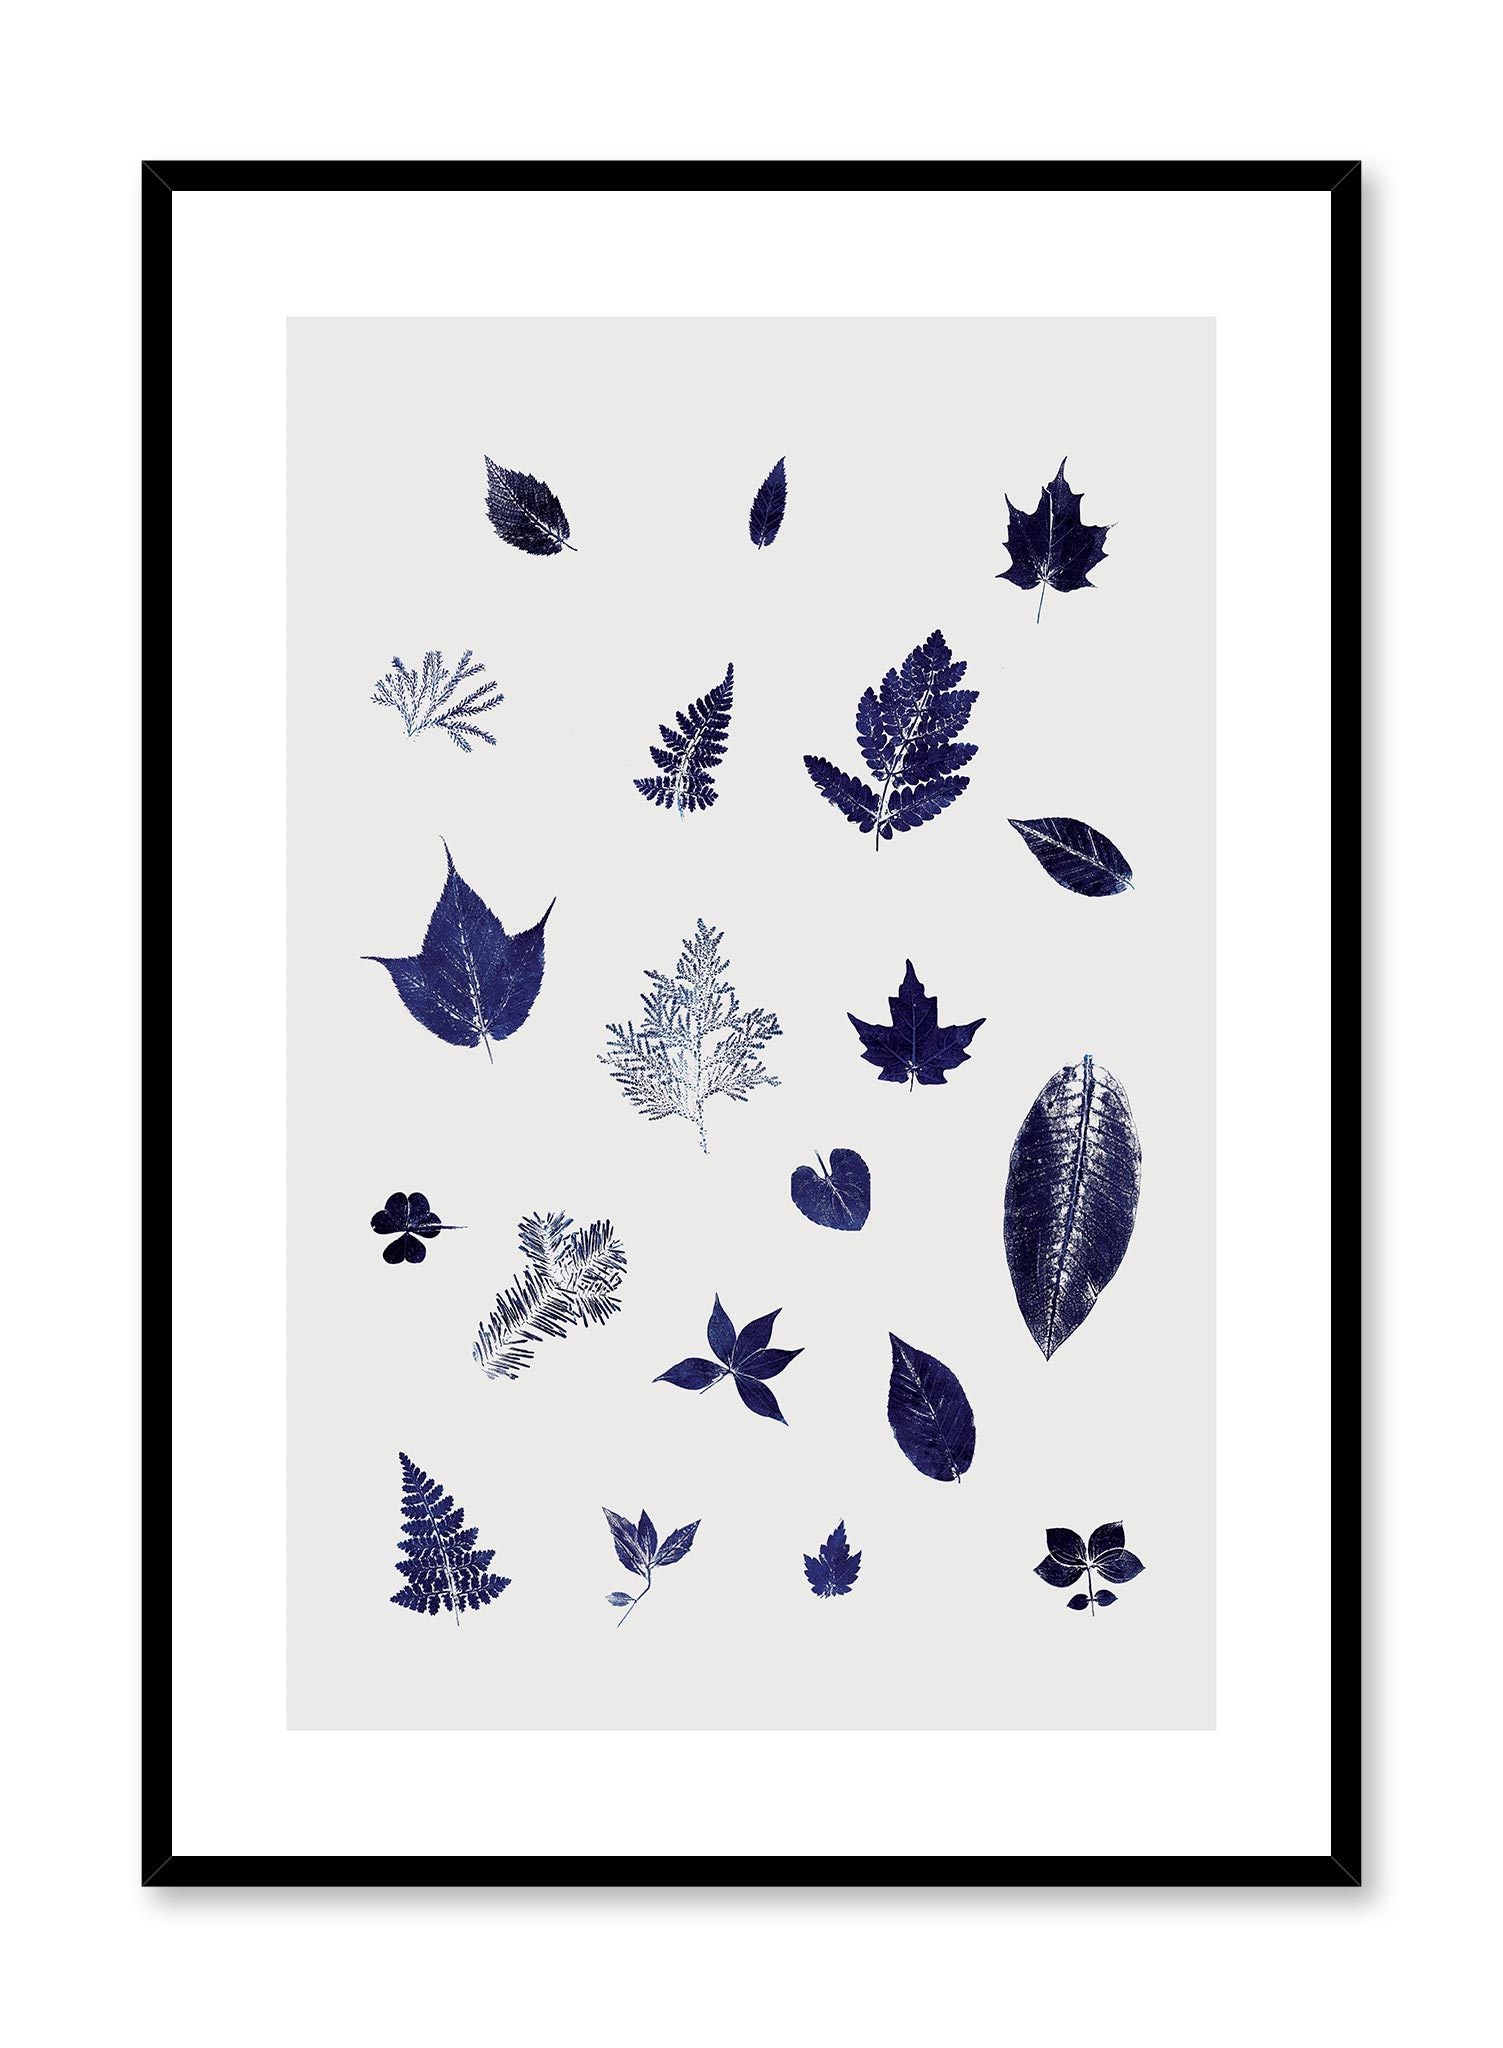 Fall in Japan is a minimalist illustration by Opposite Wall of multiple leaves coming from different trees.